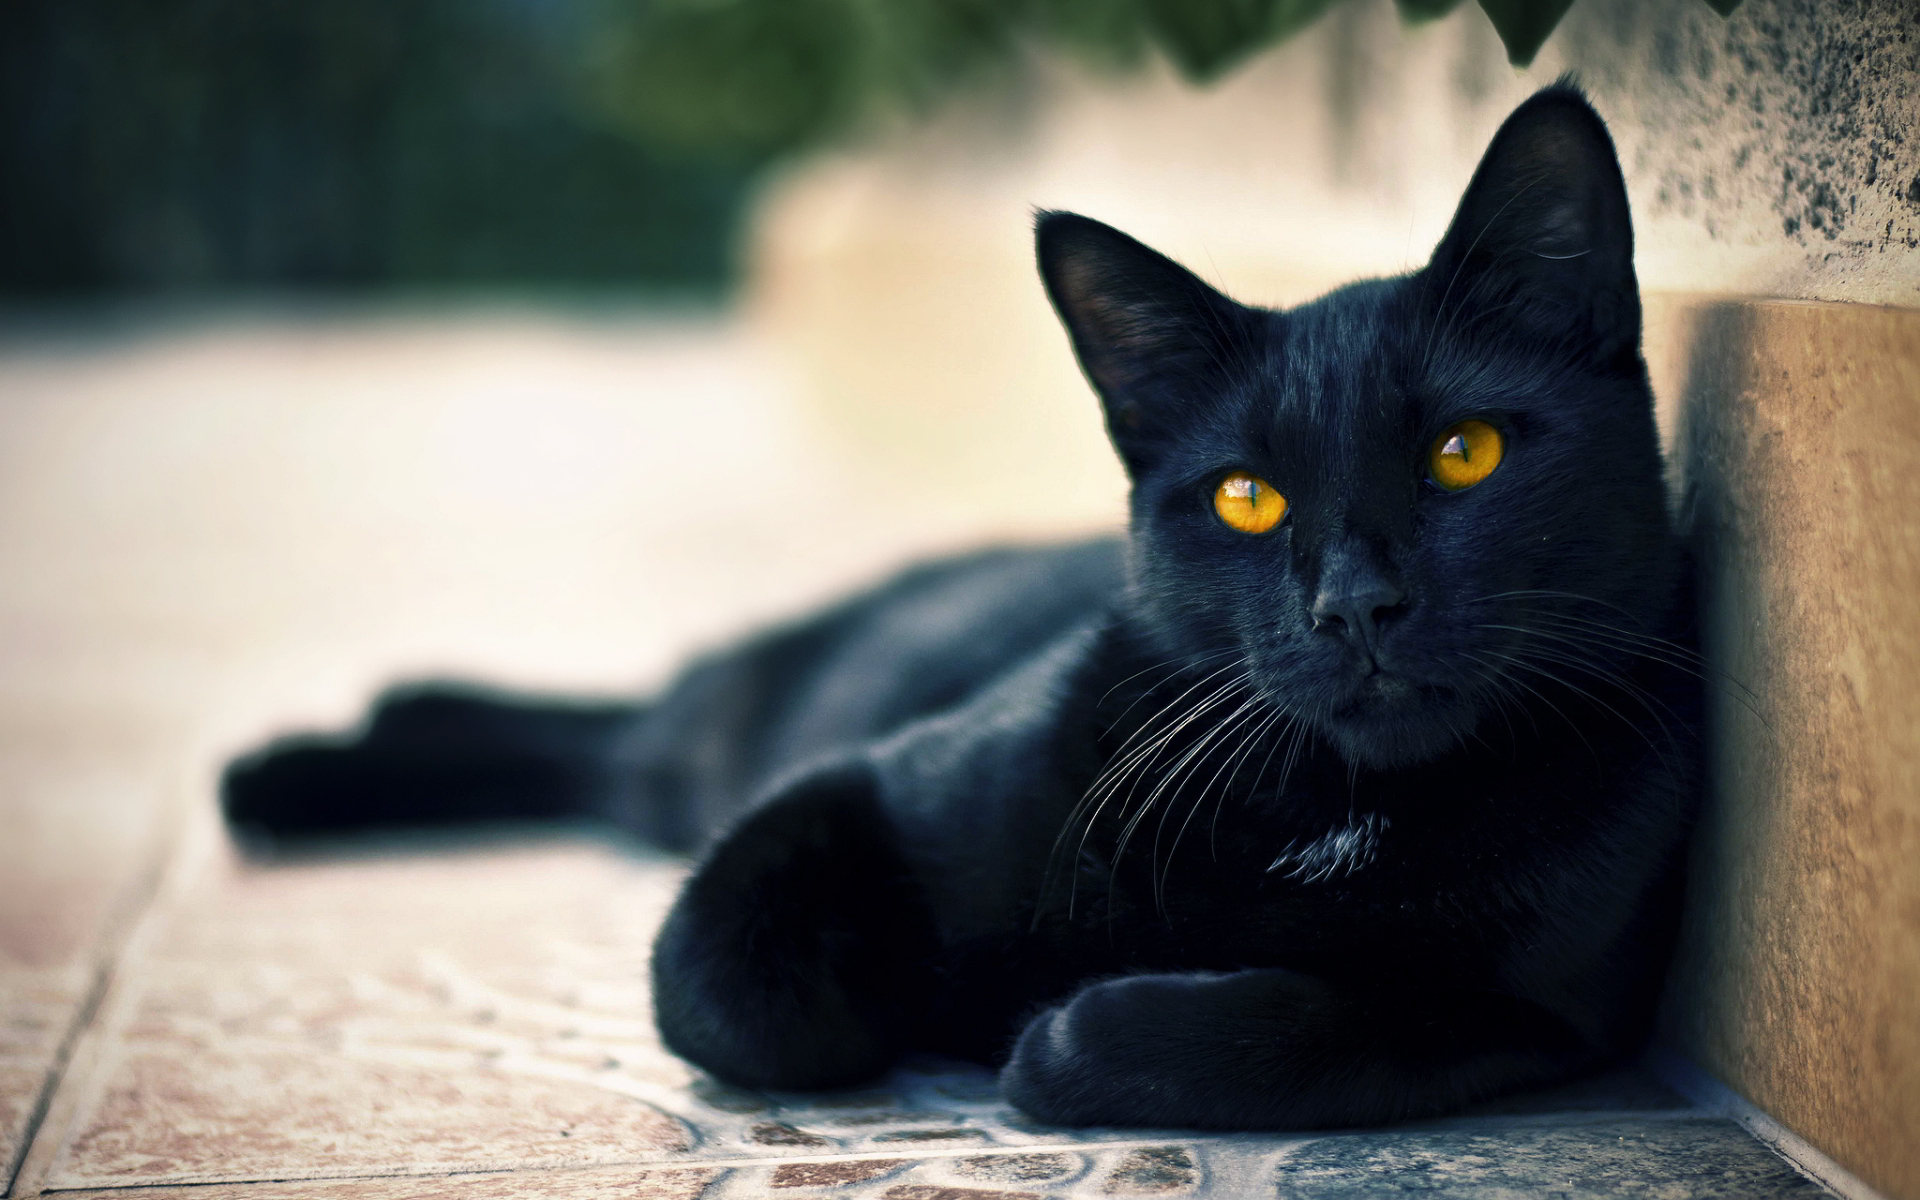 http://www.awesomelycute.com/gallery/2014/11/black-cats-awesomelycute.com-14.jpg